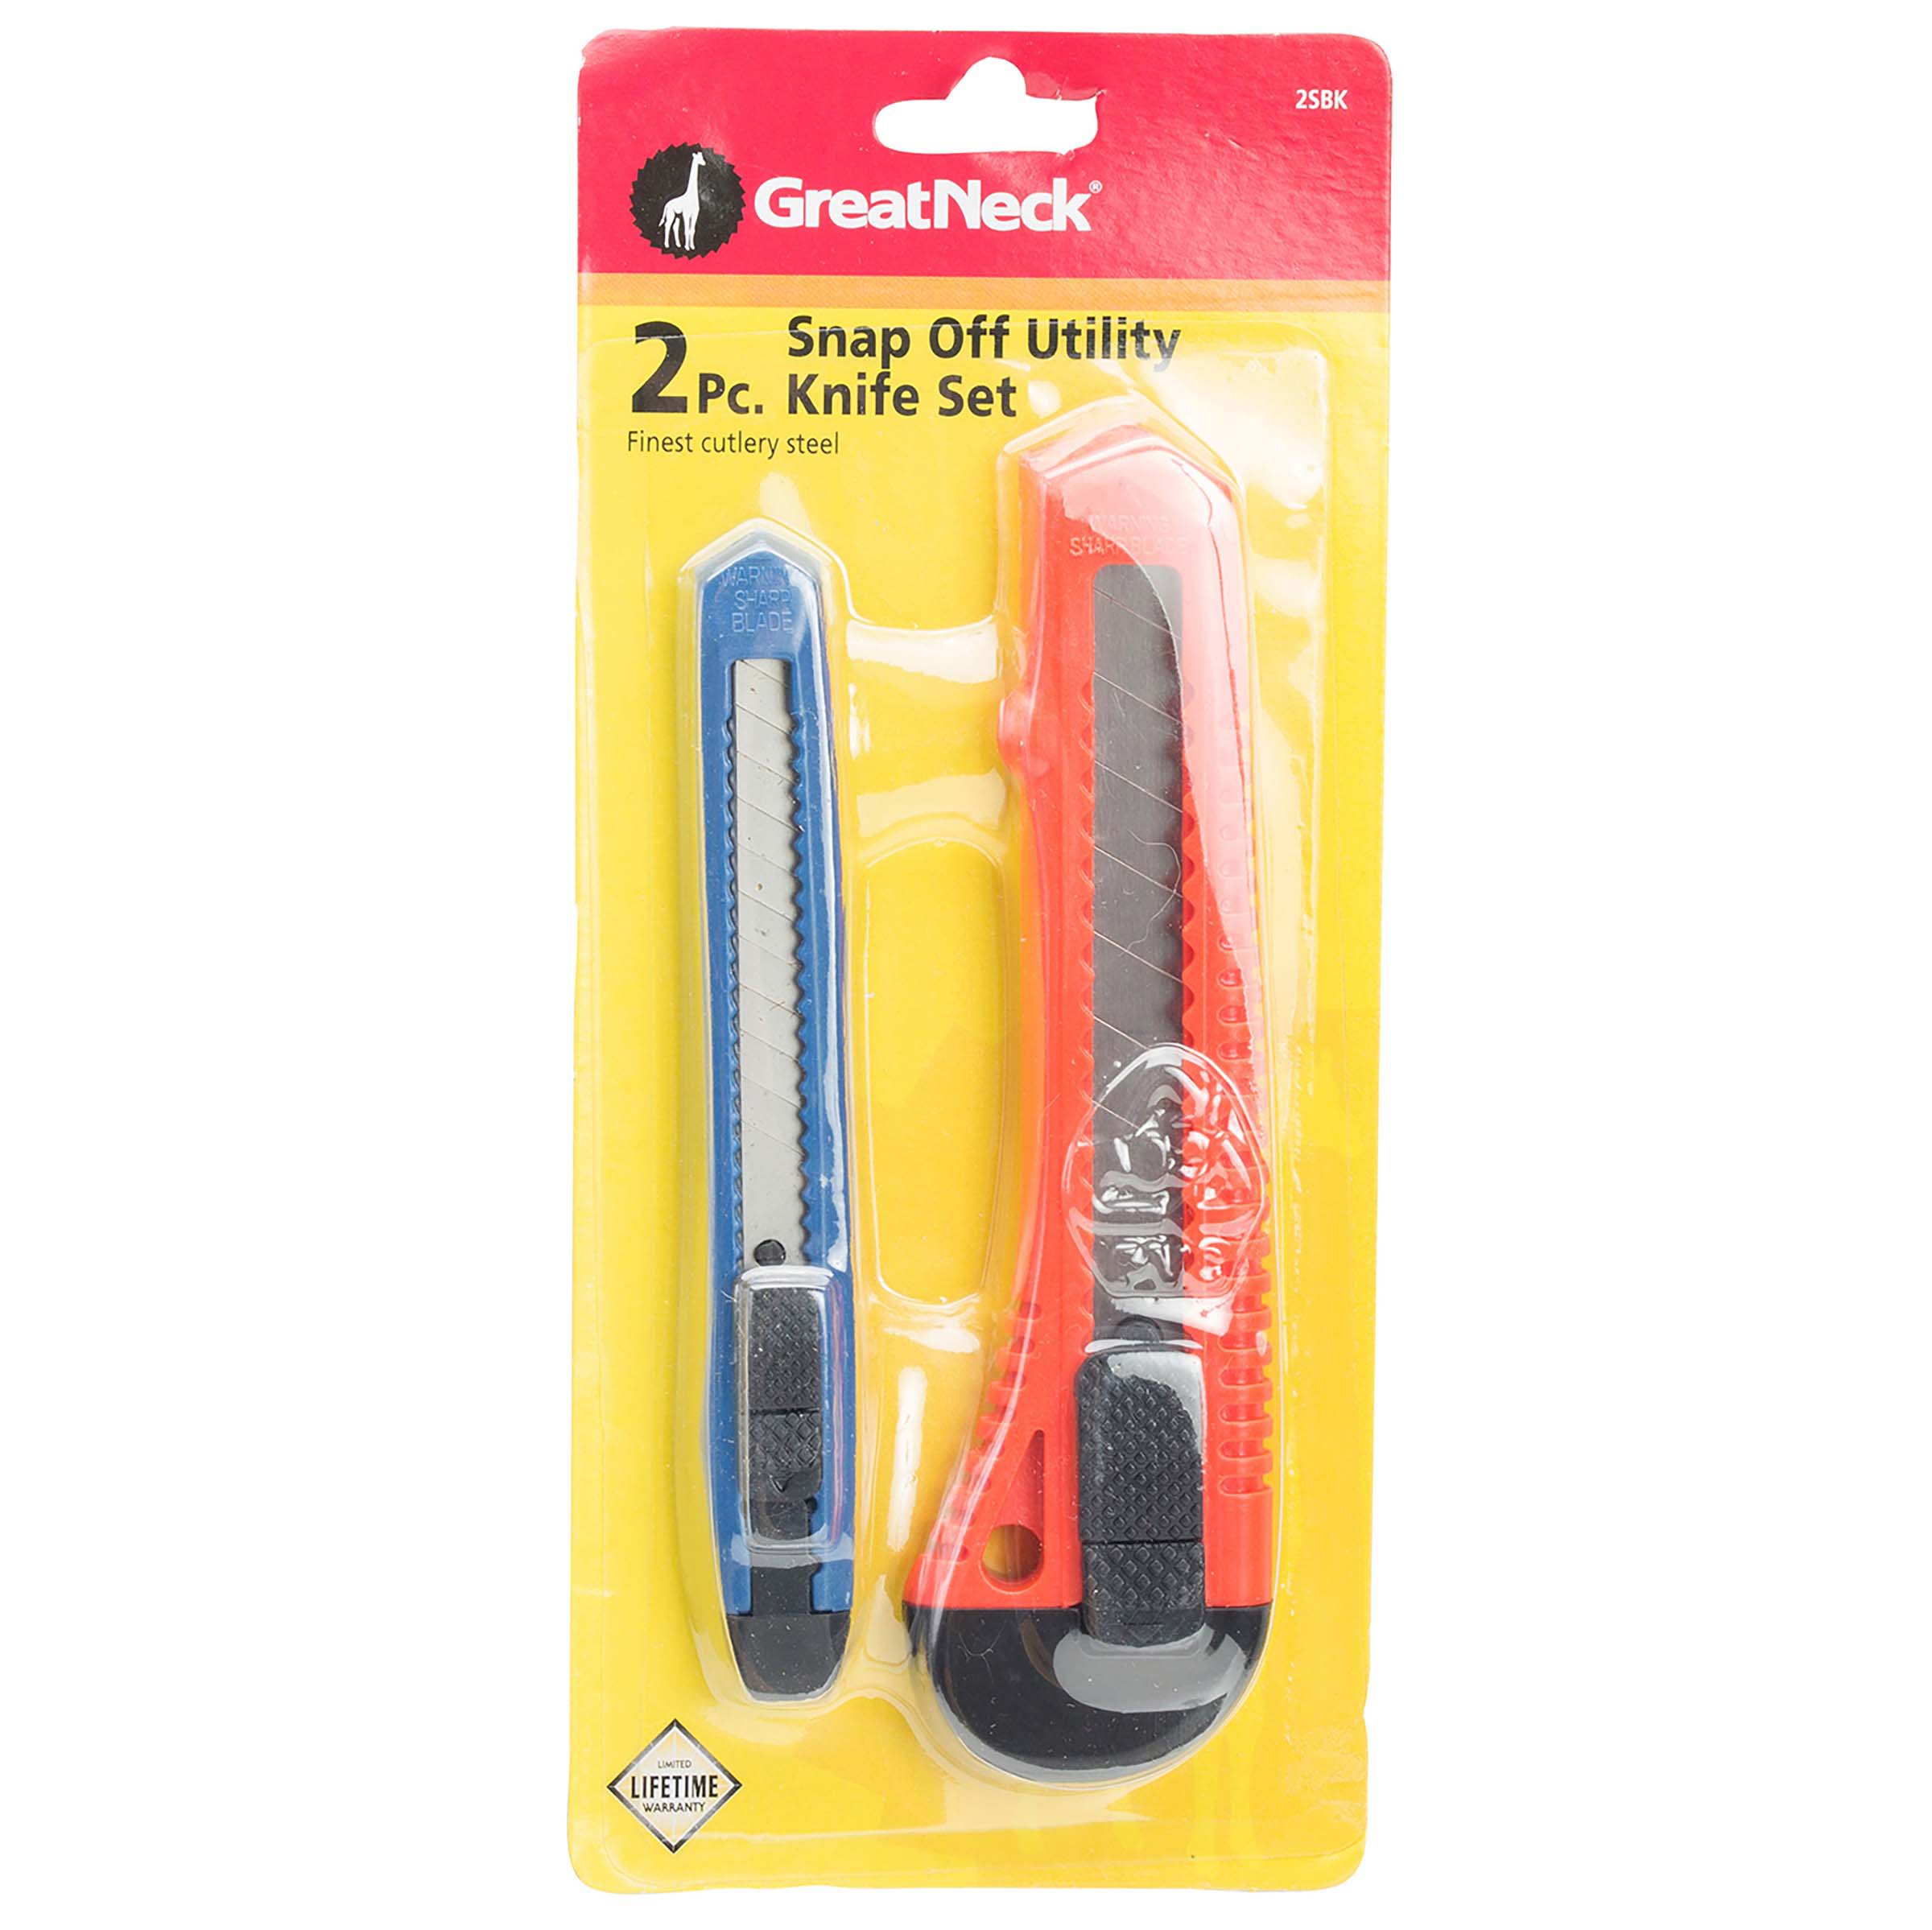 Great Neck Snap Off Utility Knife Set - Shop Hand Tools at H-E-B